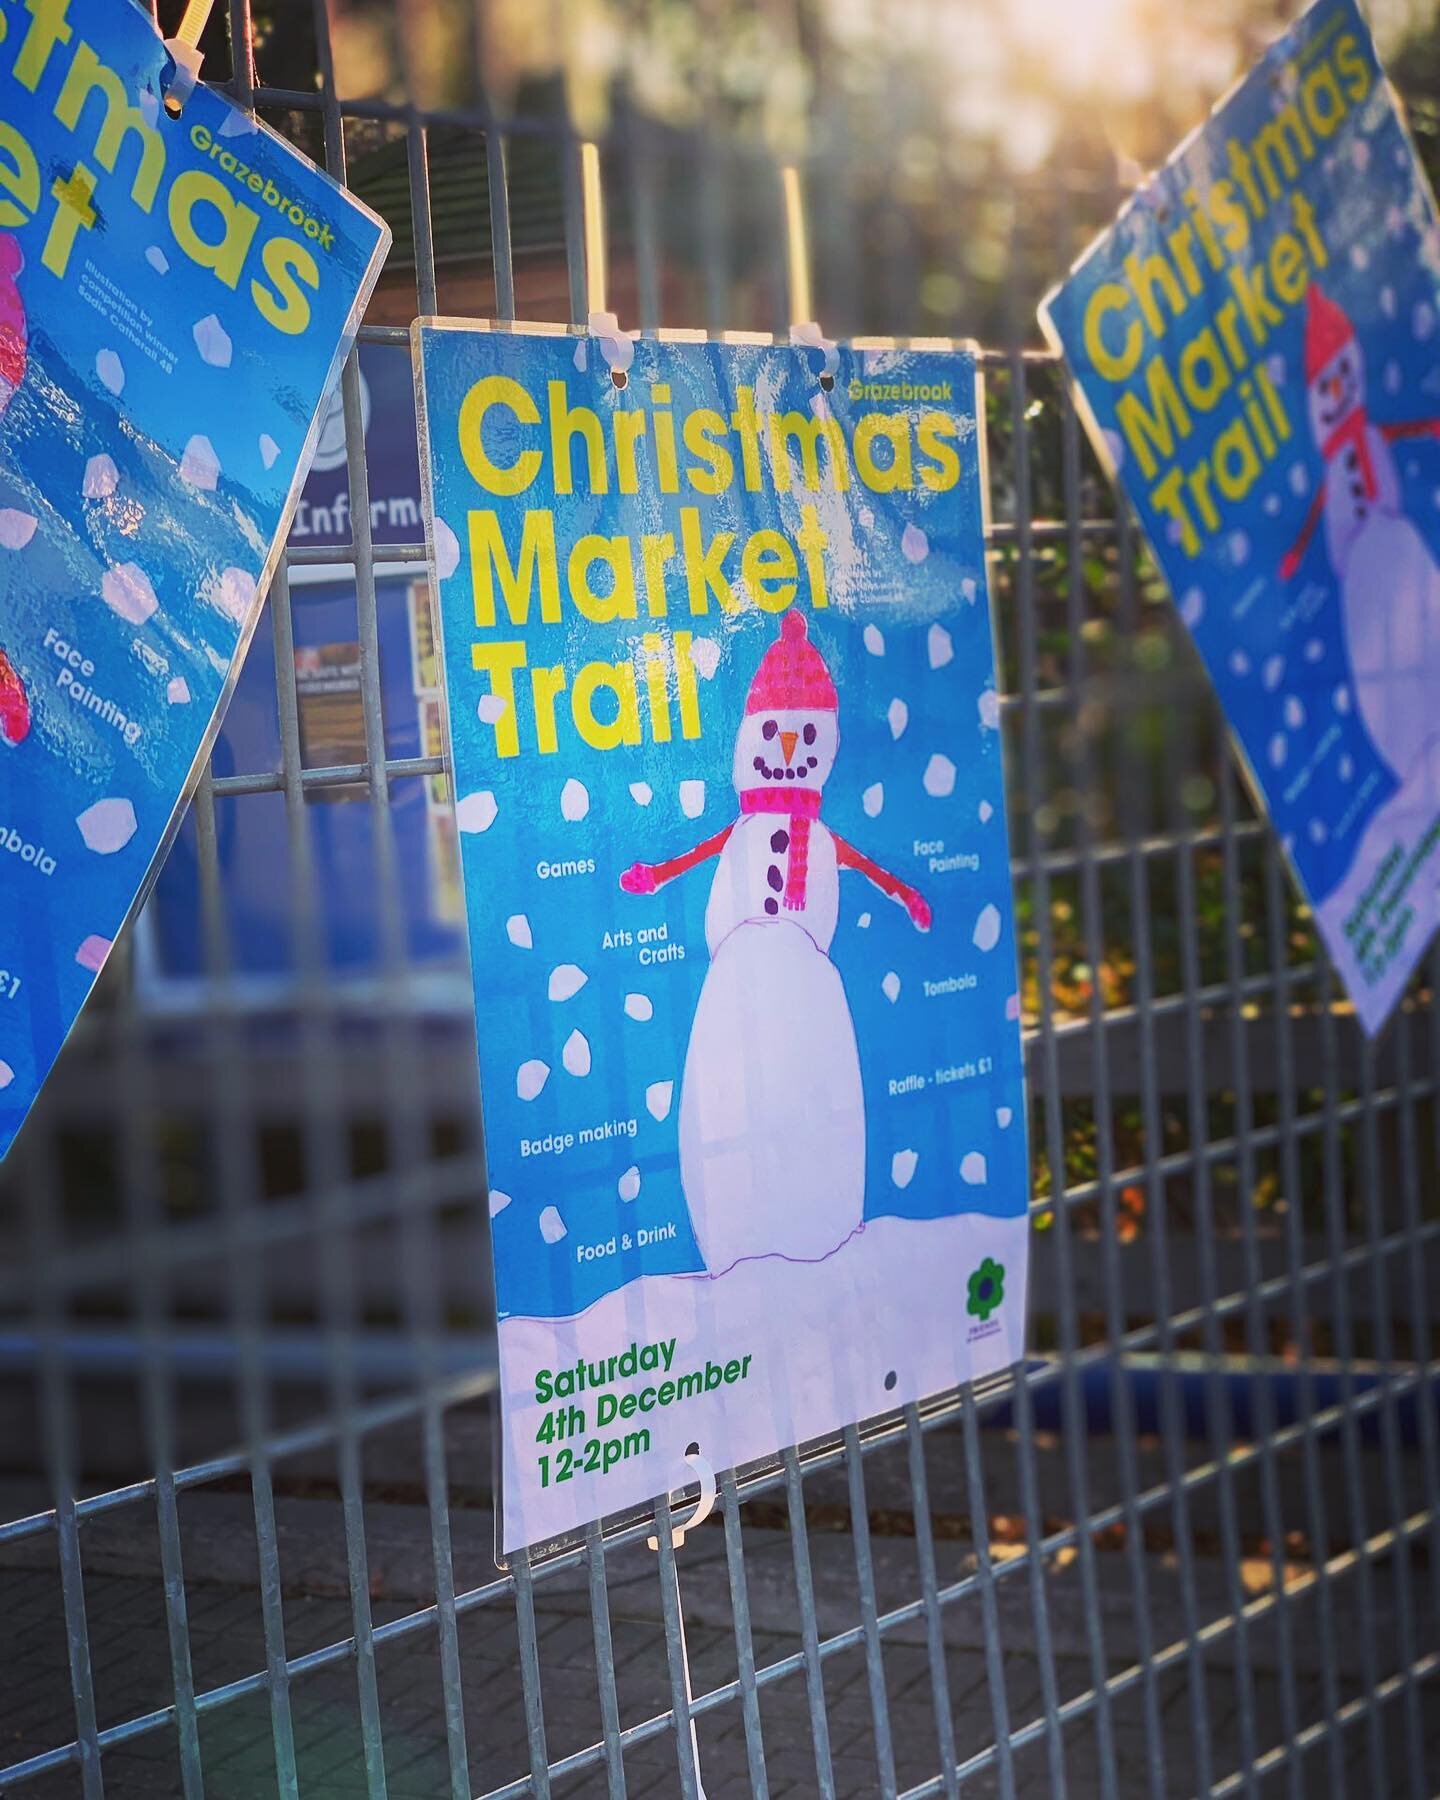 They&rsquo;re going up! Must be nearly 🎅🏼 
Head to the roads around Grazebrook Primary on Saturday 4 December from 12-2pm for all manner of festive foods, toys, books, games and more! 🎄 

Head to Lordship, Grayling, Grazebrook, Bouverie and Yoakle